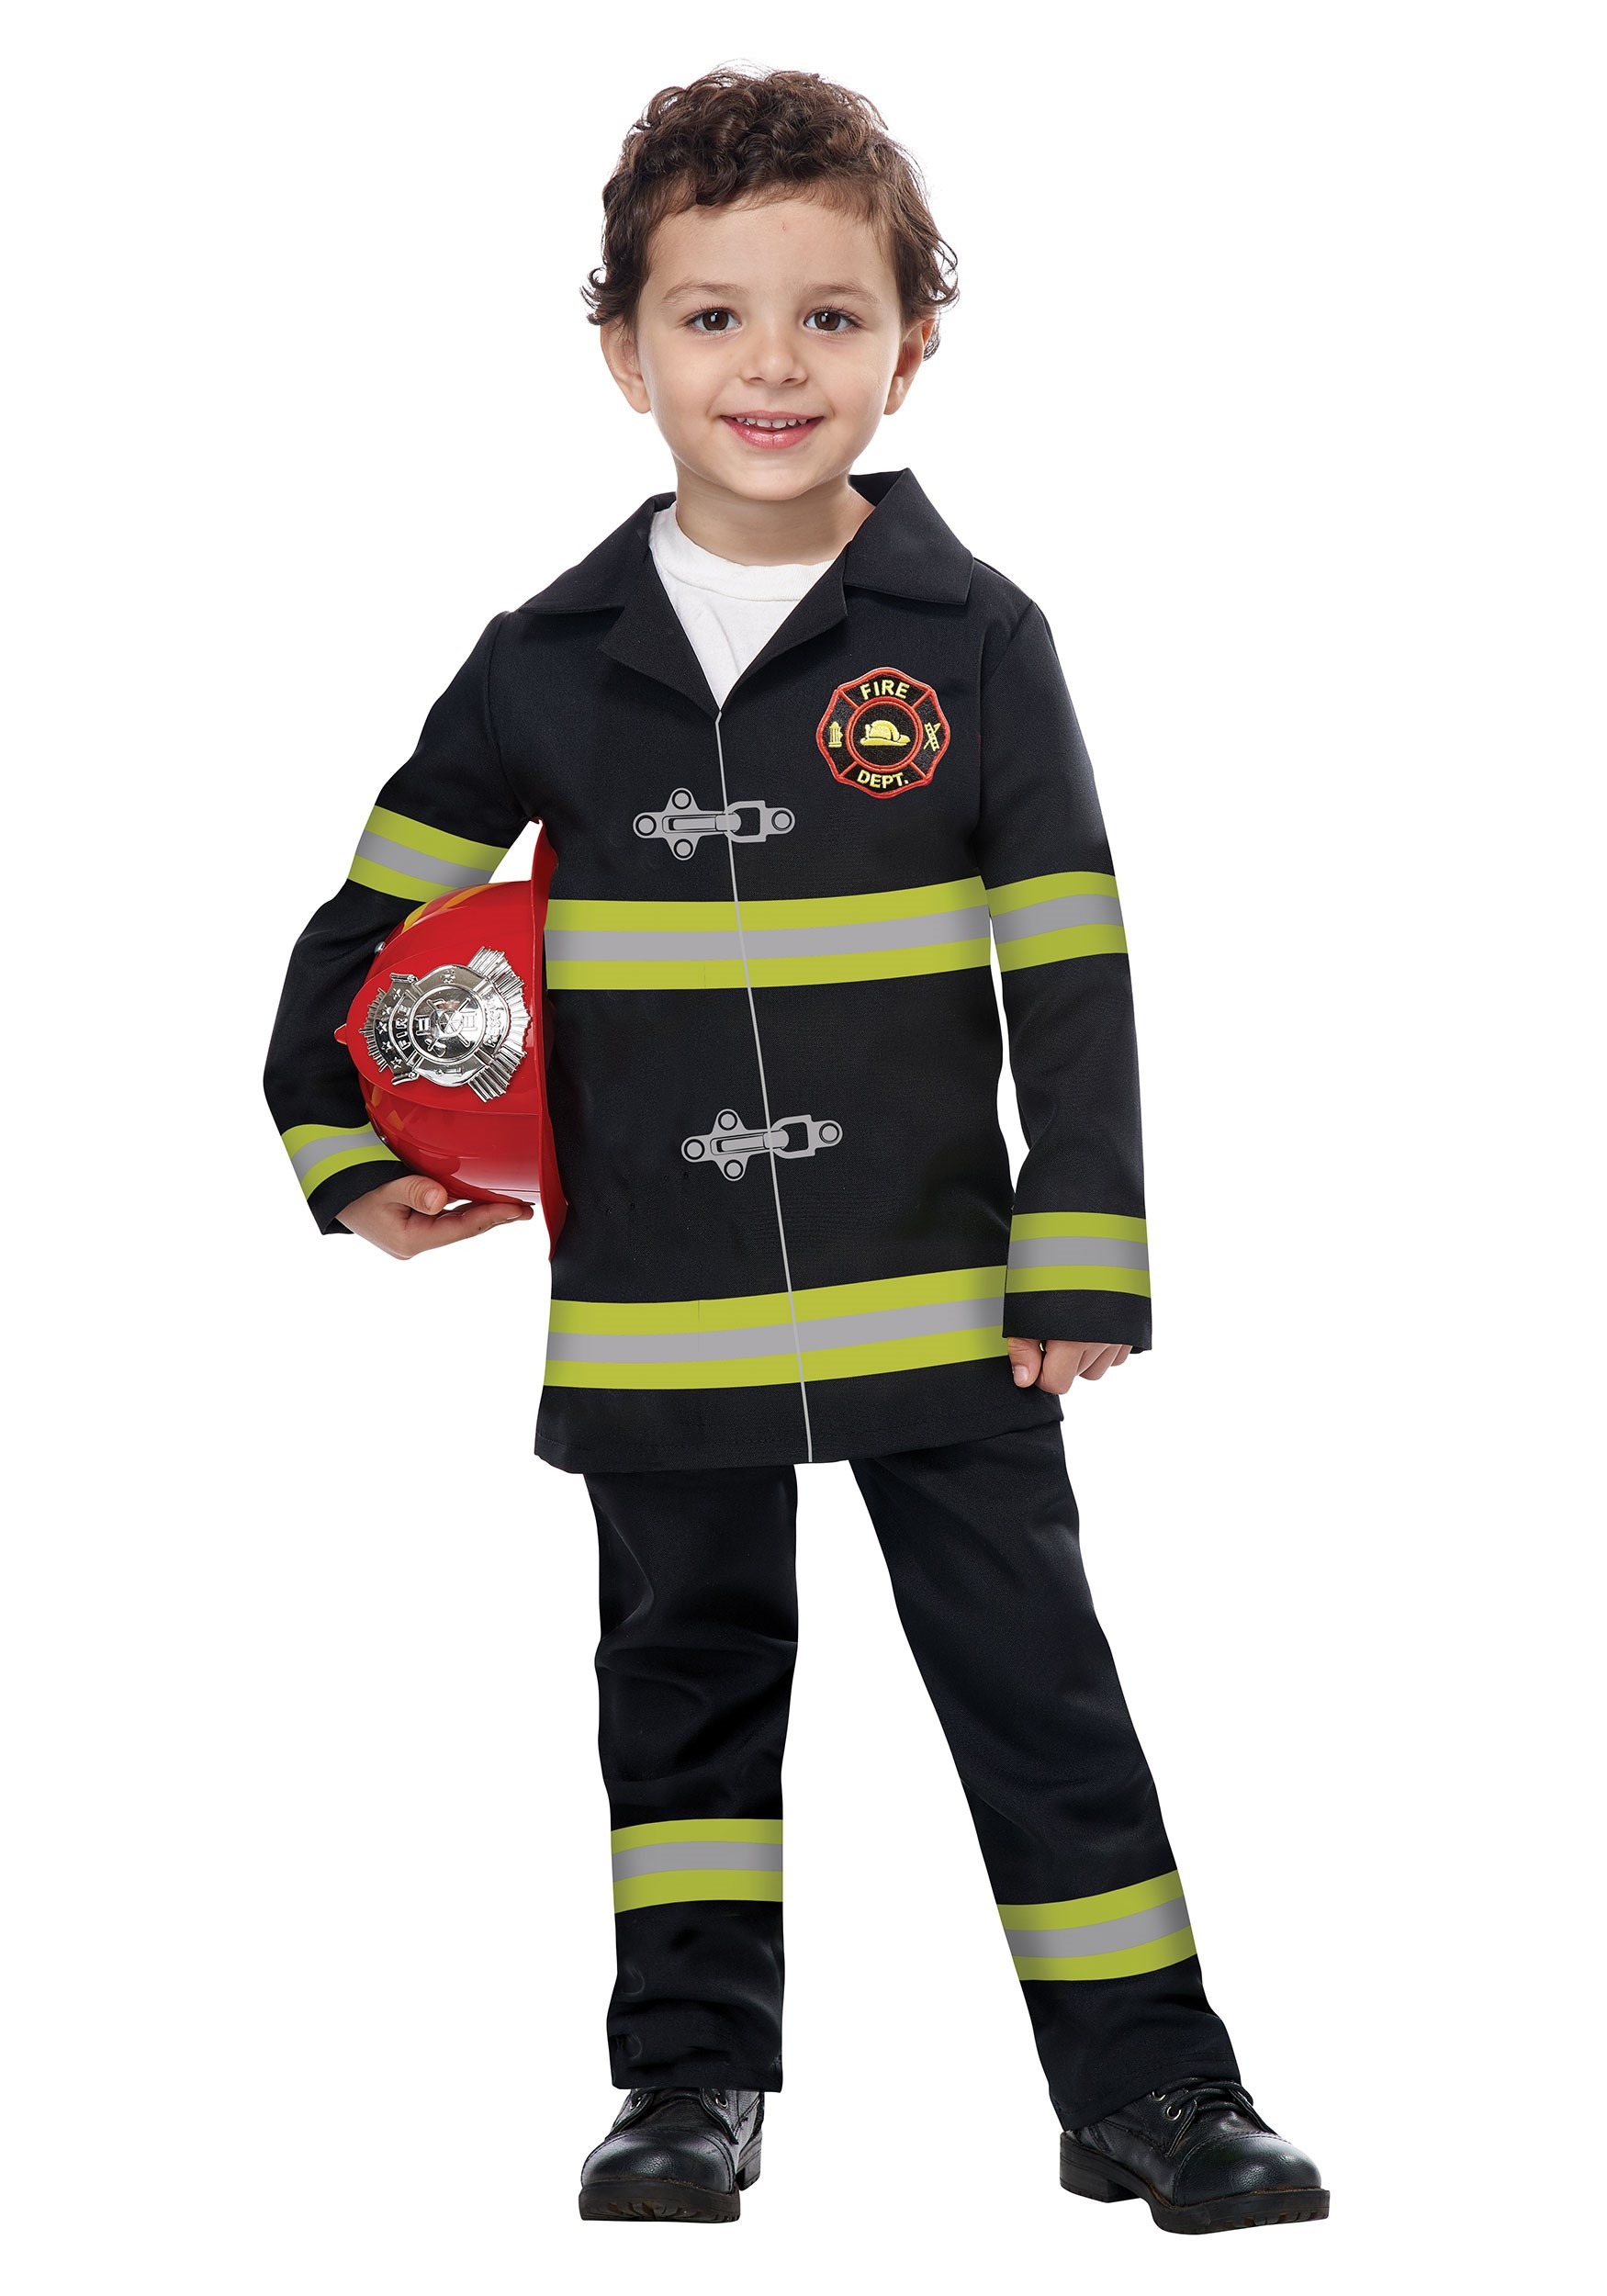 Jr Fire Chief Costume for Toddlers